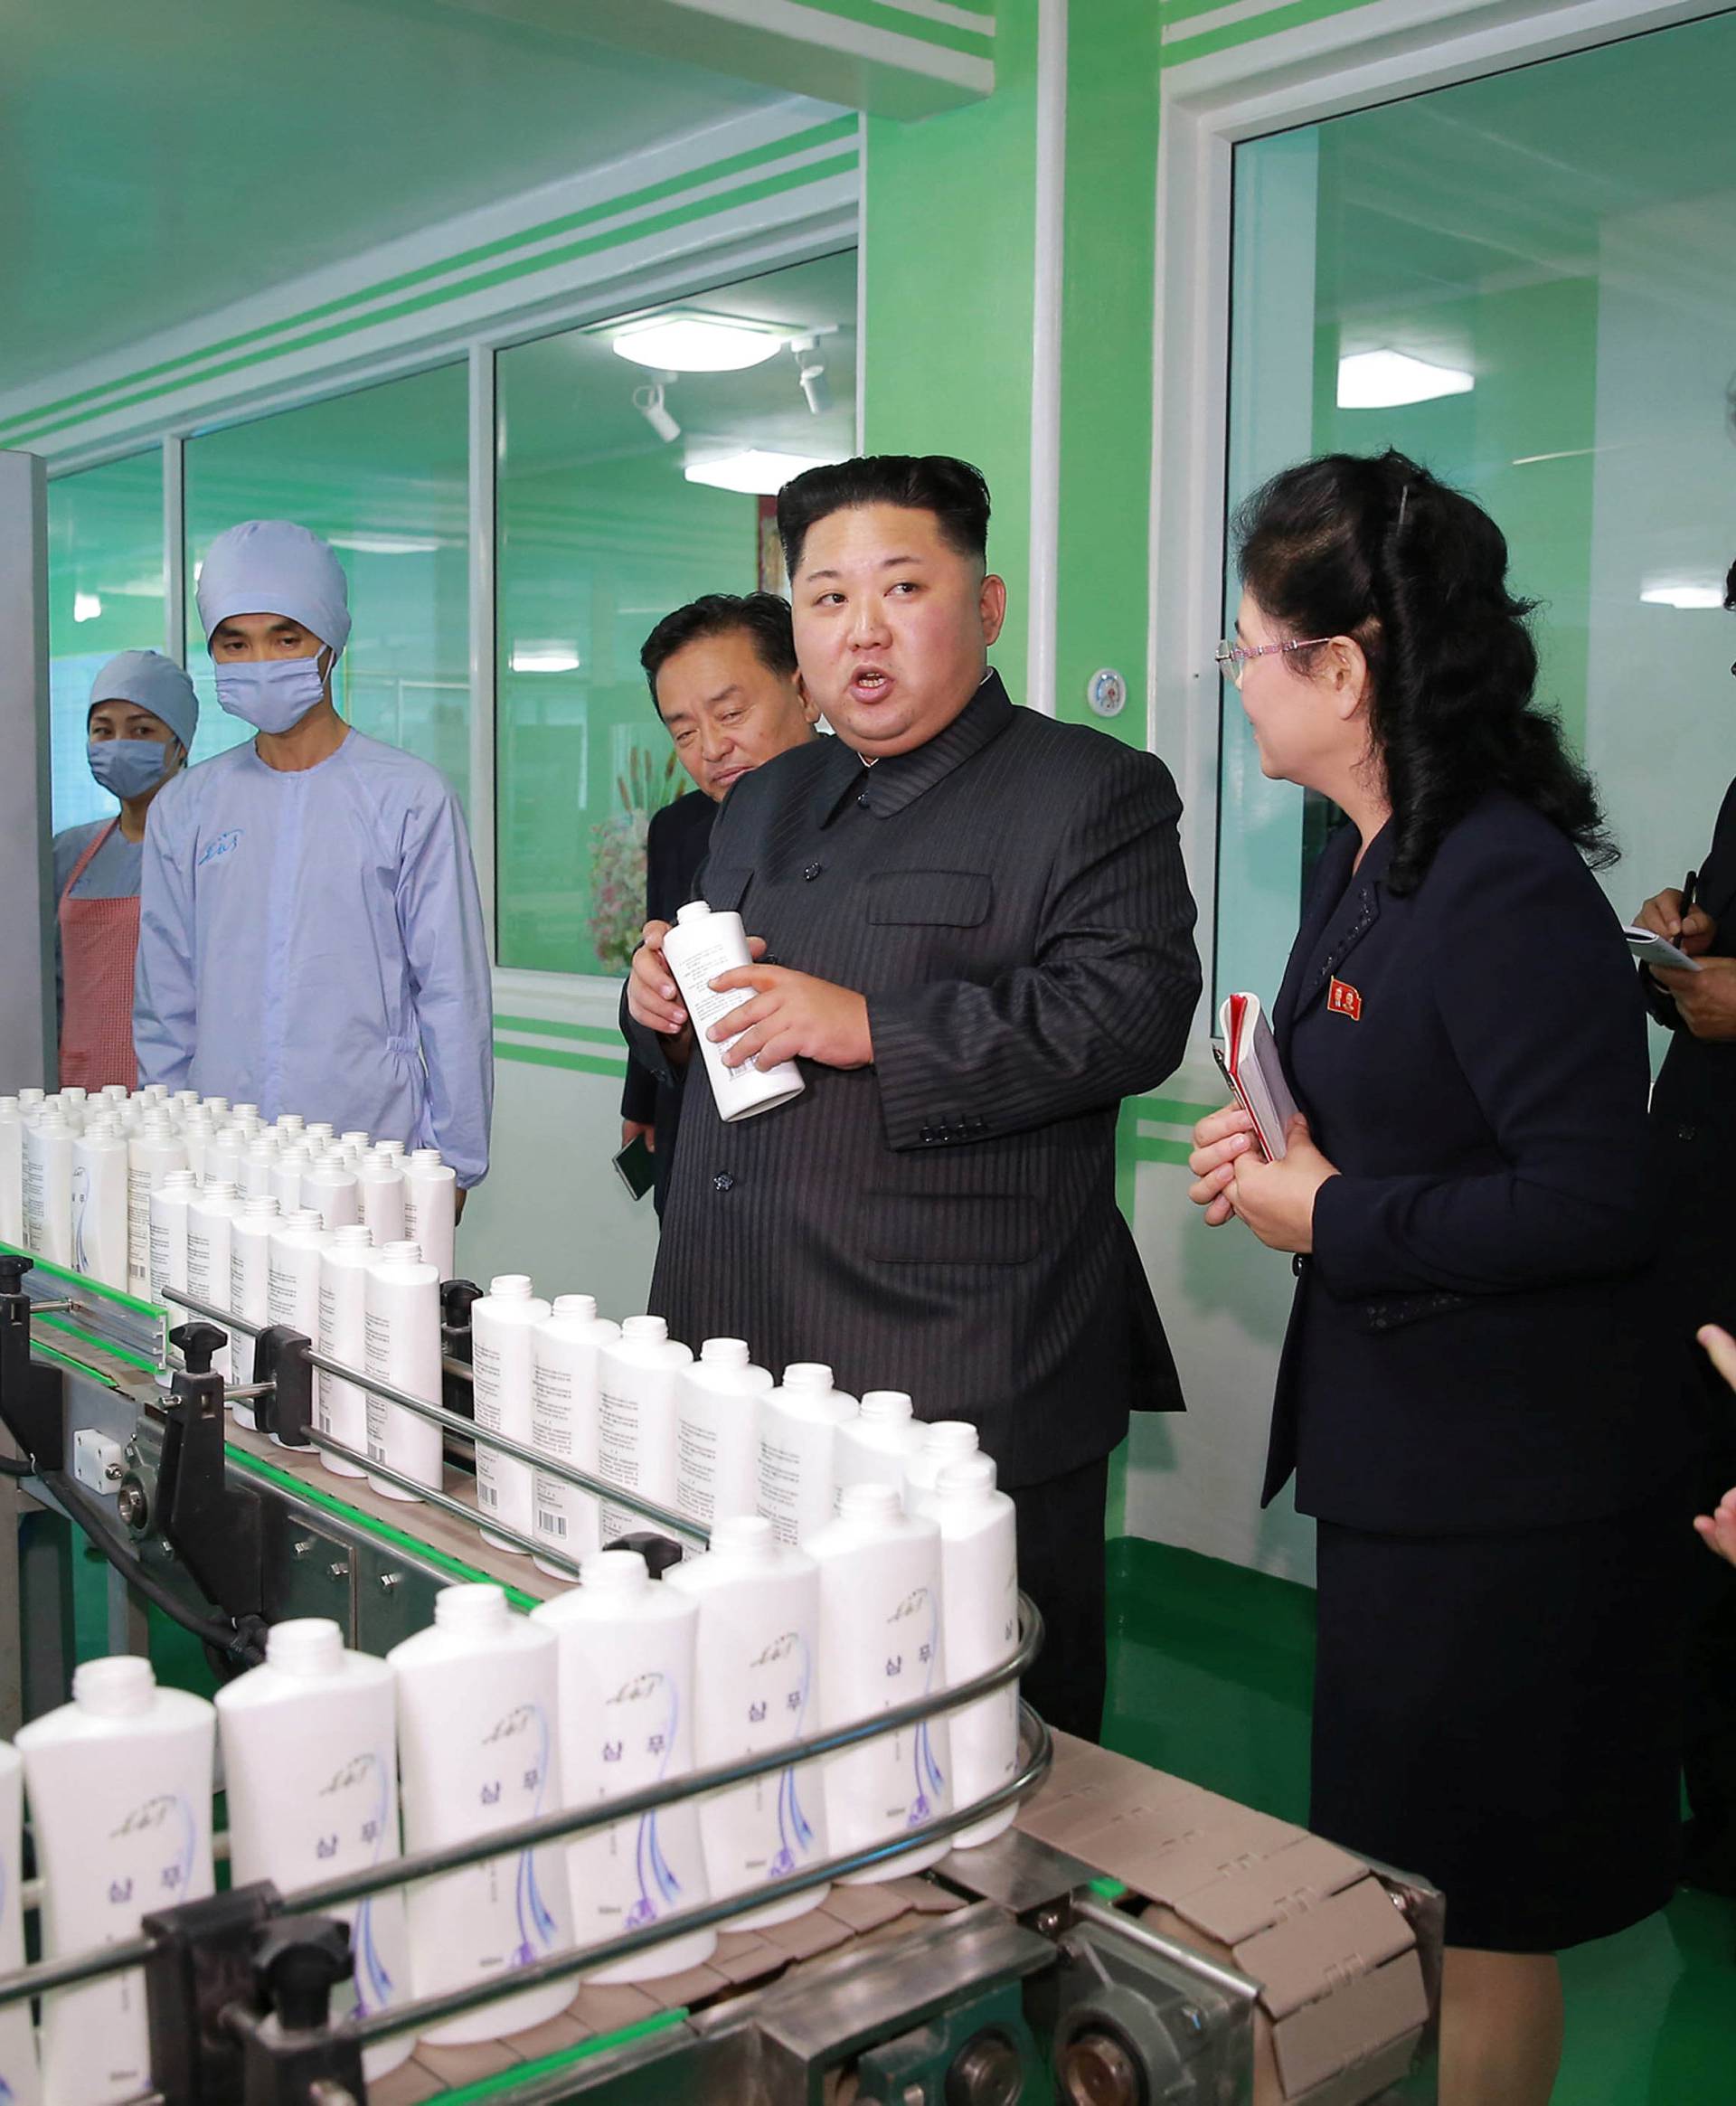 North Korean leader Kim Jong Un and wife Ri Sol Ju visit a cosmetics factory in this undated photo released by North Korea's Korean Central News Agency (KCNA) in Pyongyang